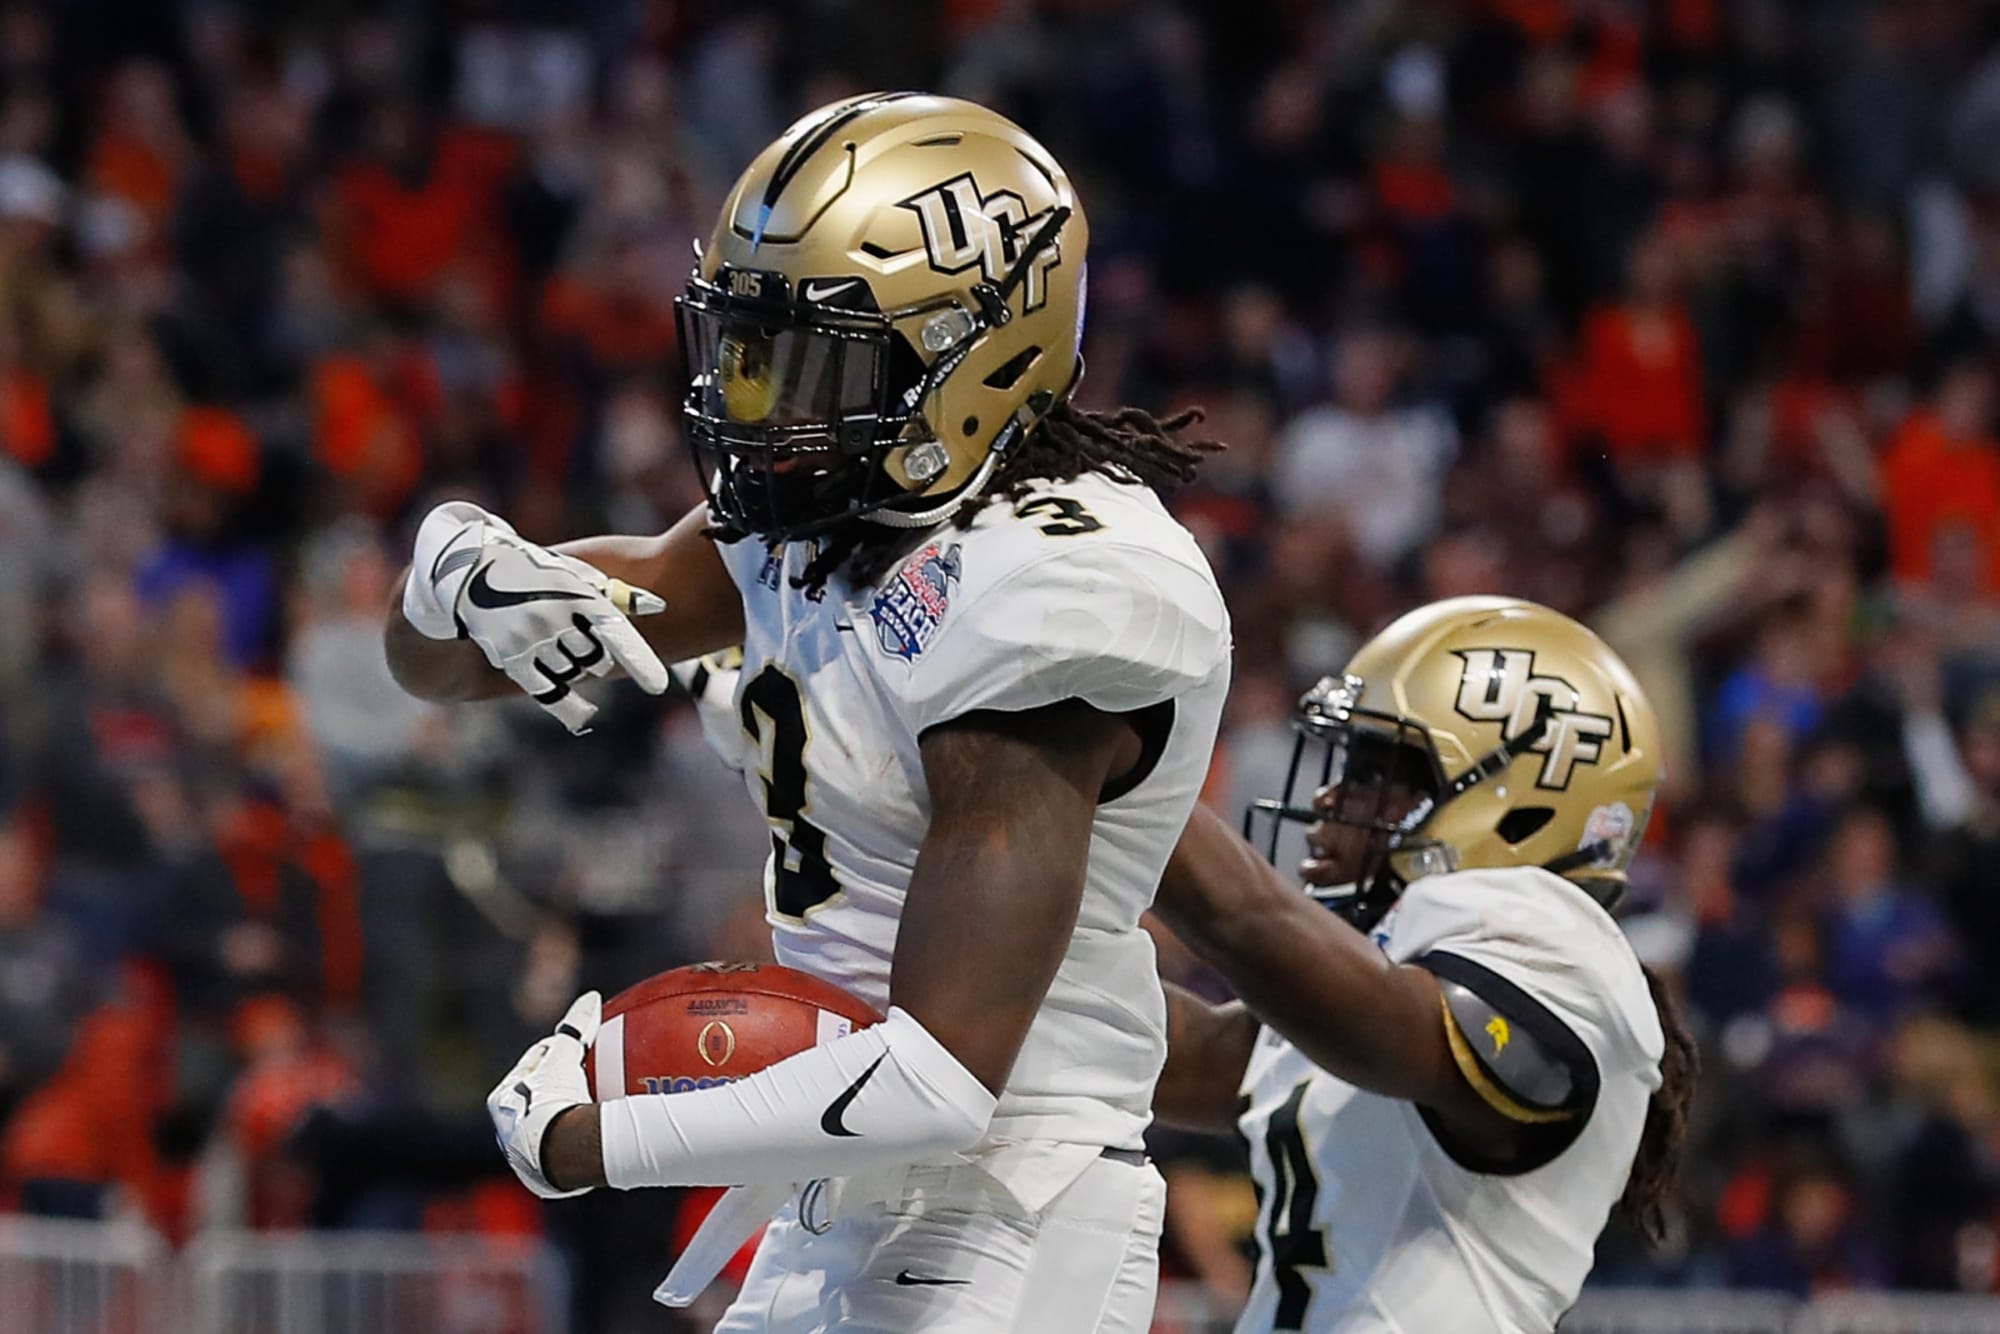 UCF Football: Is Knights' schedule stronger without North Carolina game?